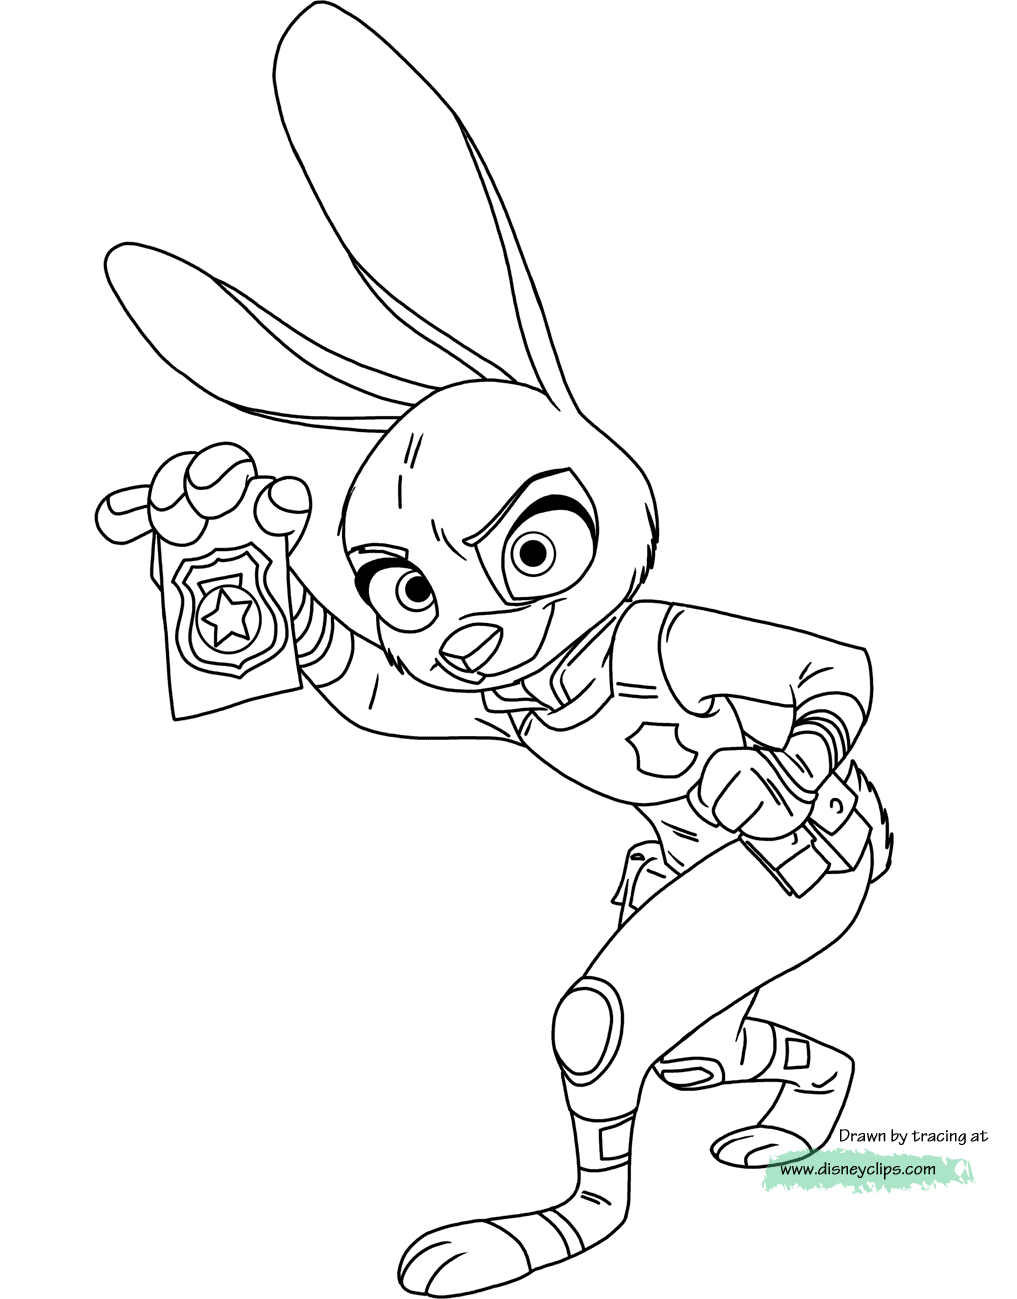 Zootopia Coloring Pages   Disneyclips.com